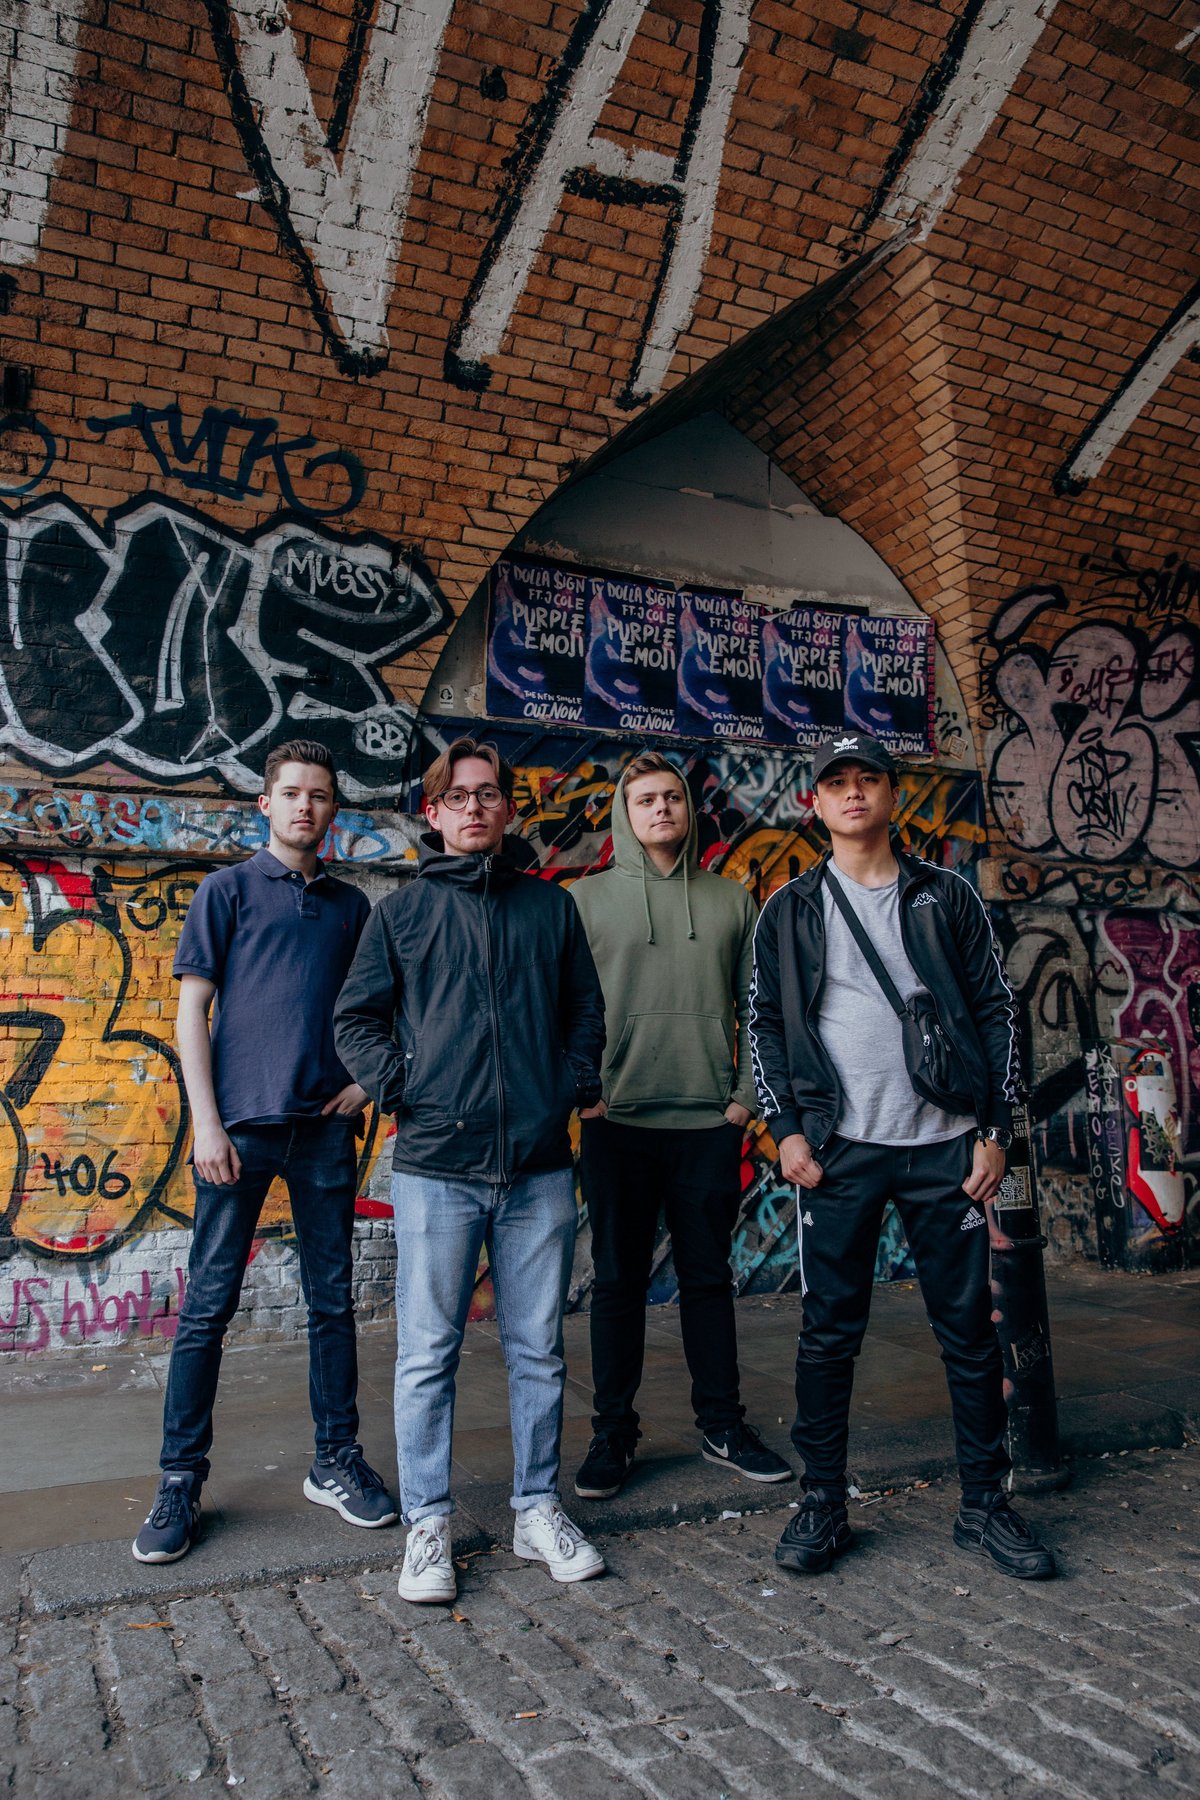 RAMES stood under an archway in Shoreditch during their press shoot